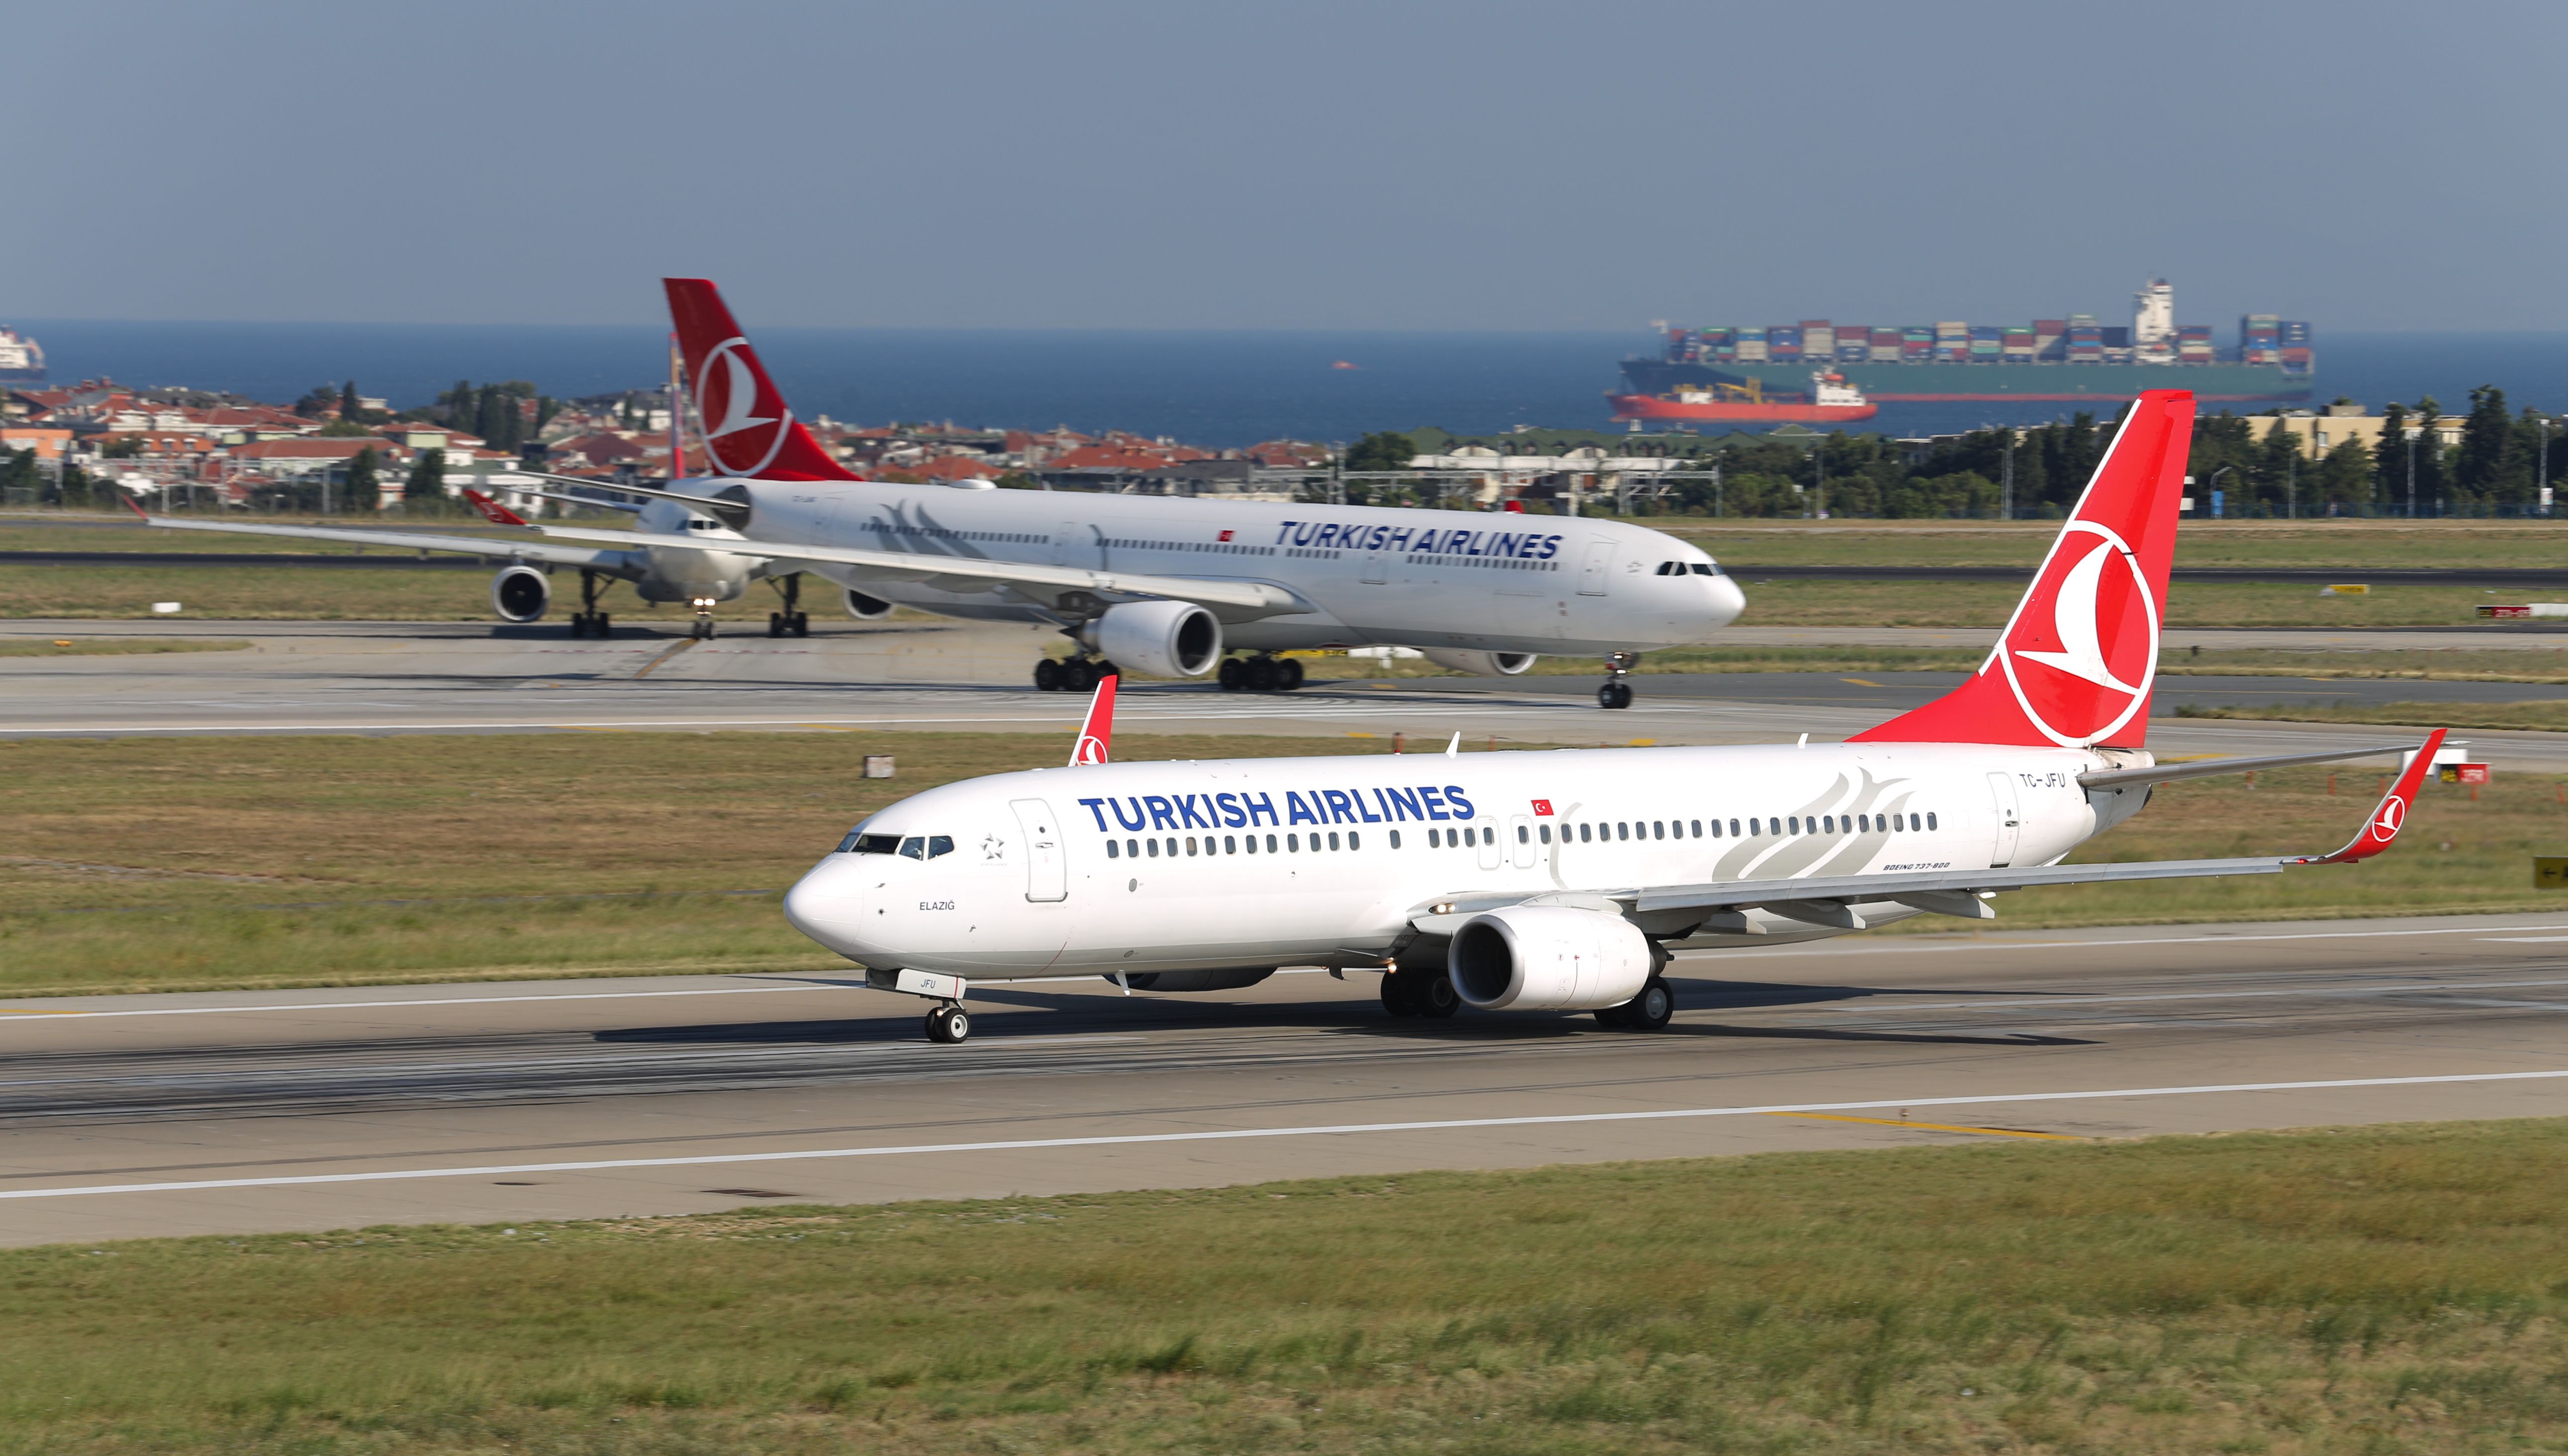 Turkish Airlines Boeing 737 On The Runway In Istanbul